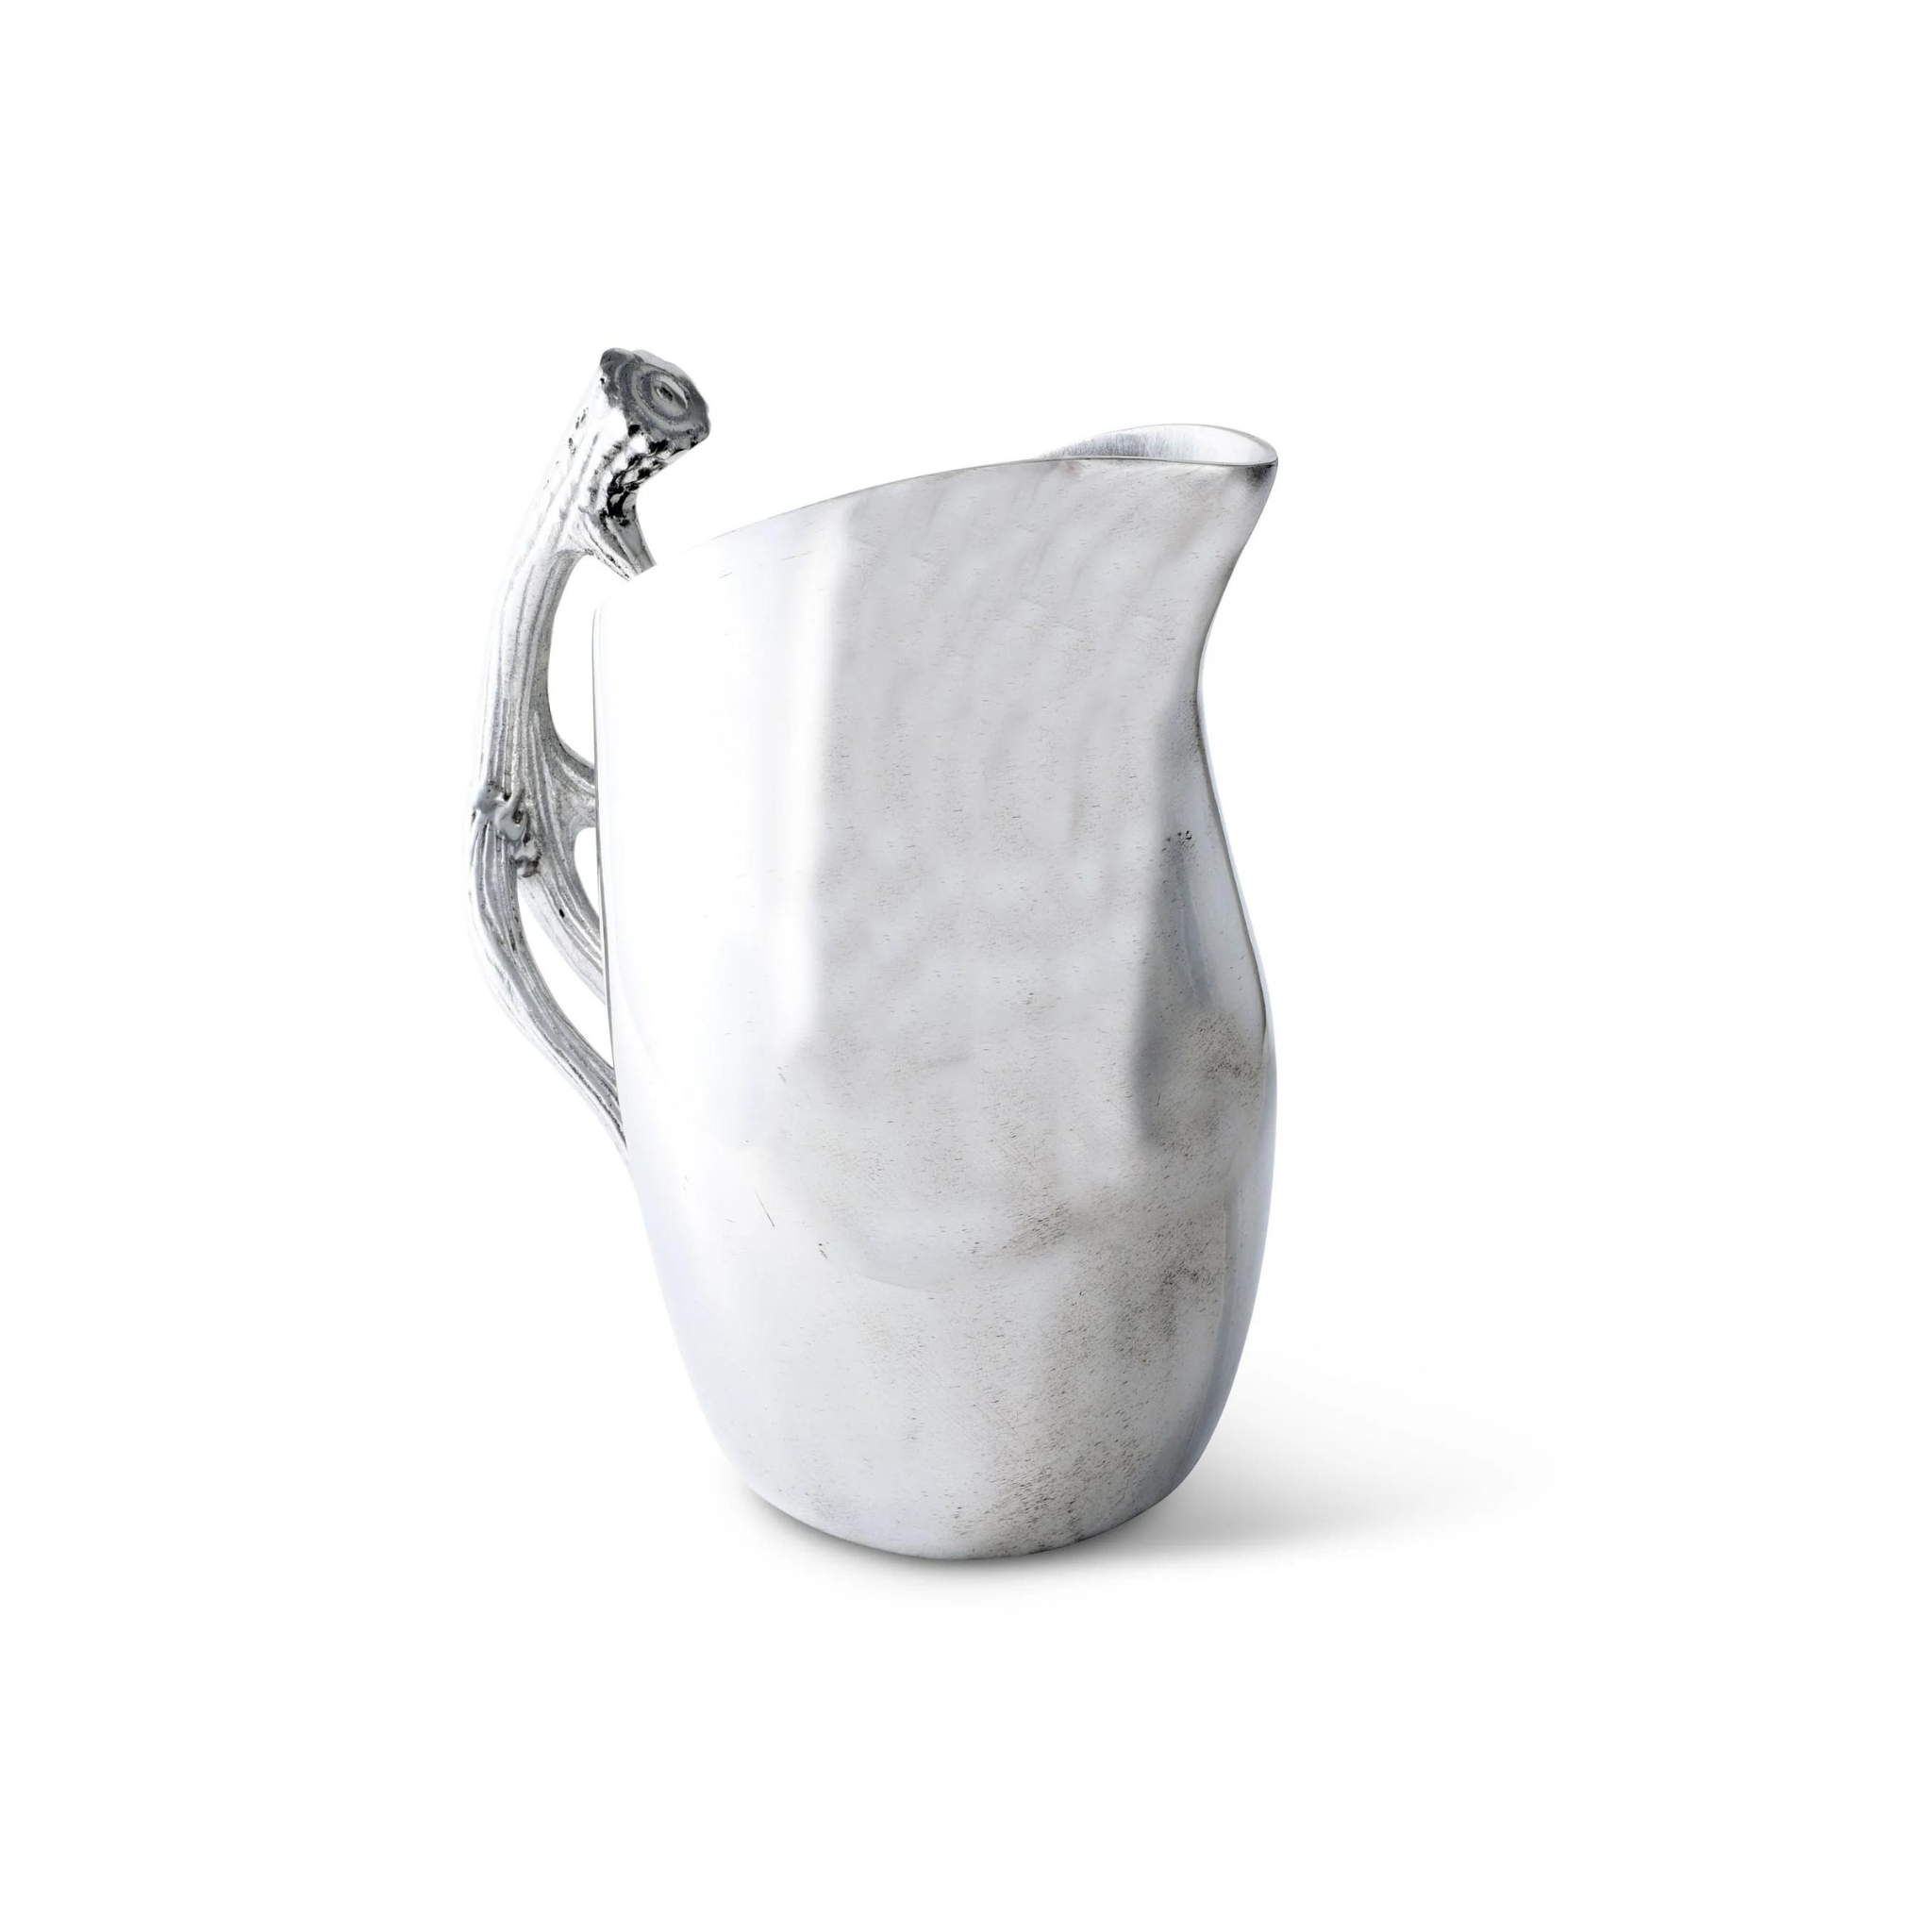 a silver pitcher with an elegantly curved handle resembling a stylized antler. The body of the pitcher is smooth with a reflective surface, and it tapers towards the top, ending in a pointed spout for pouring. The design is modern with organic elements, suggesting a contemporary take on traditional serveware.